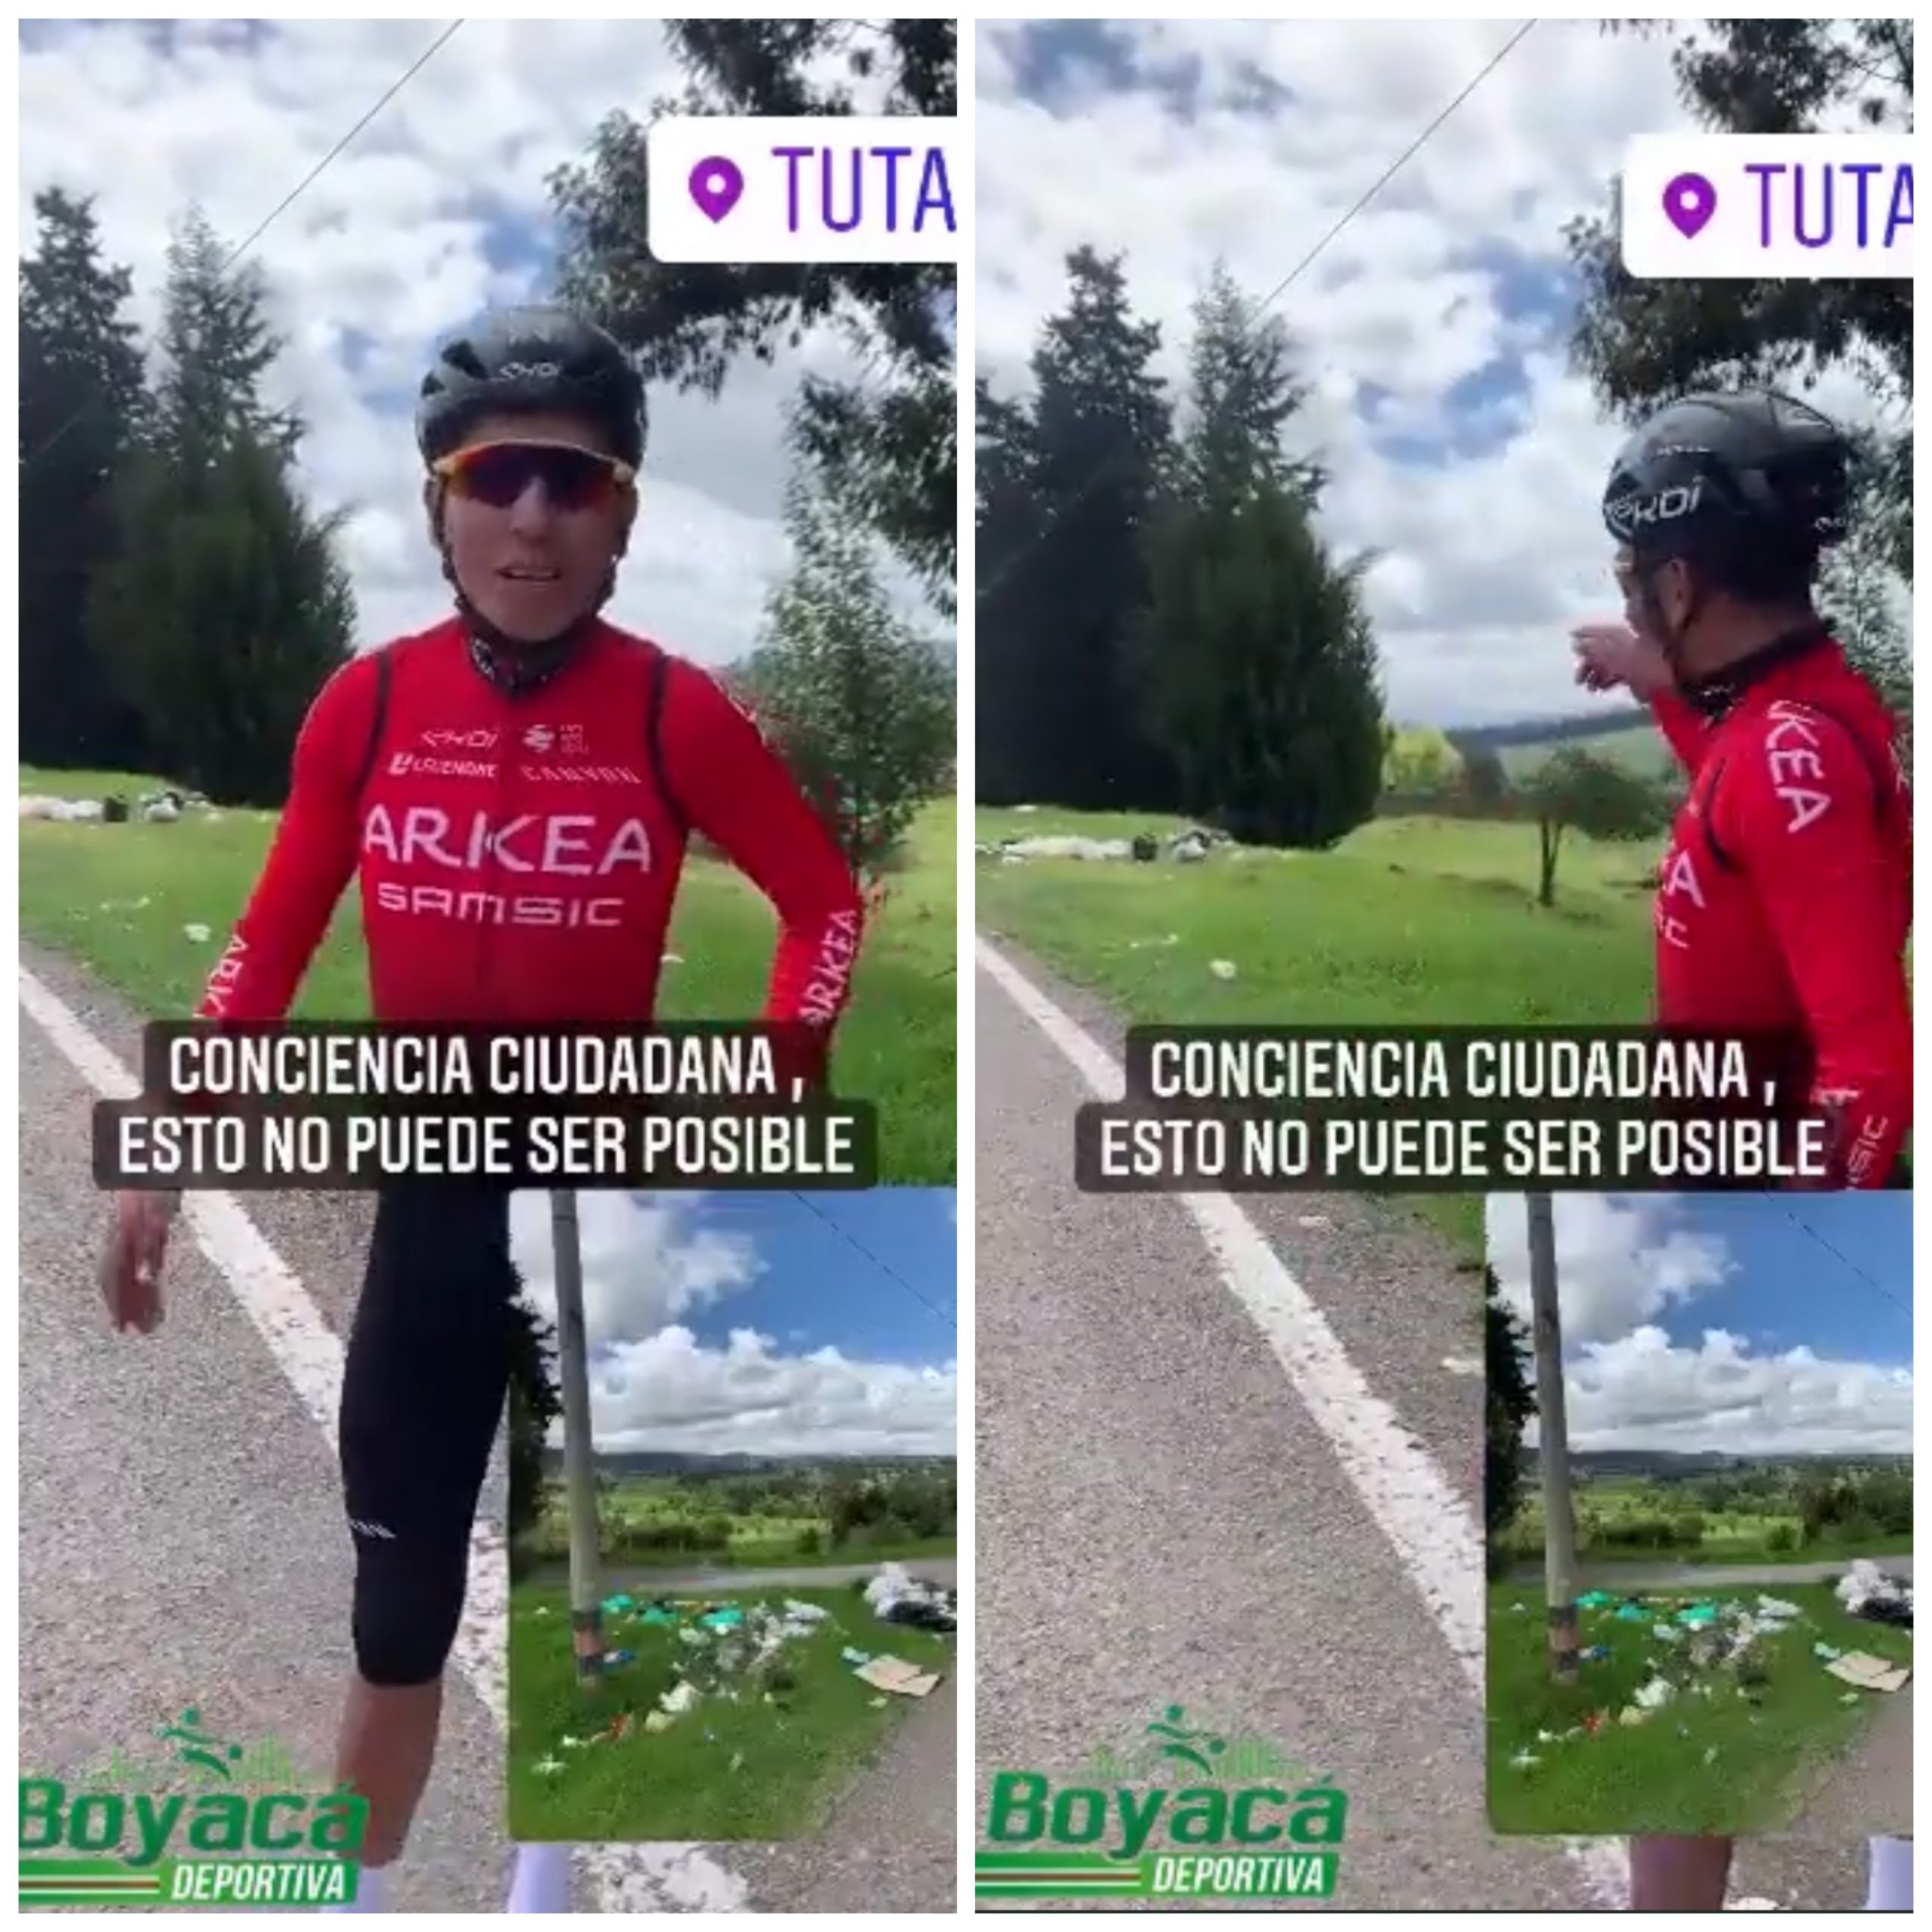 The garbage dump that Nairo Quintana found on the road while training in Boyacá